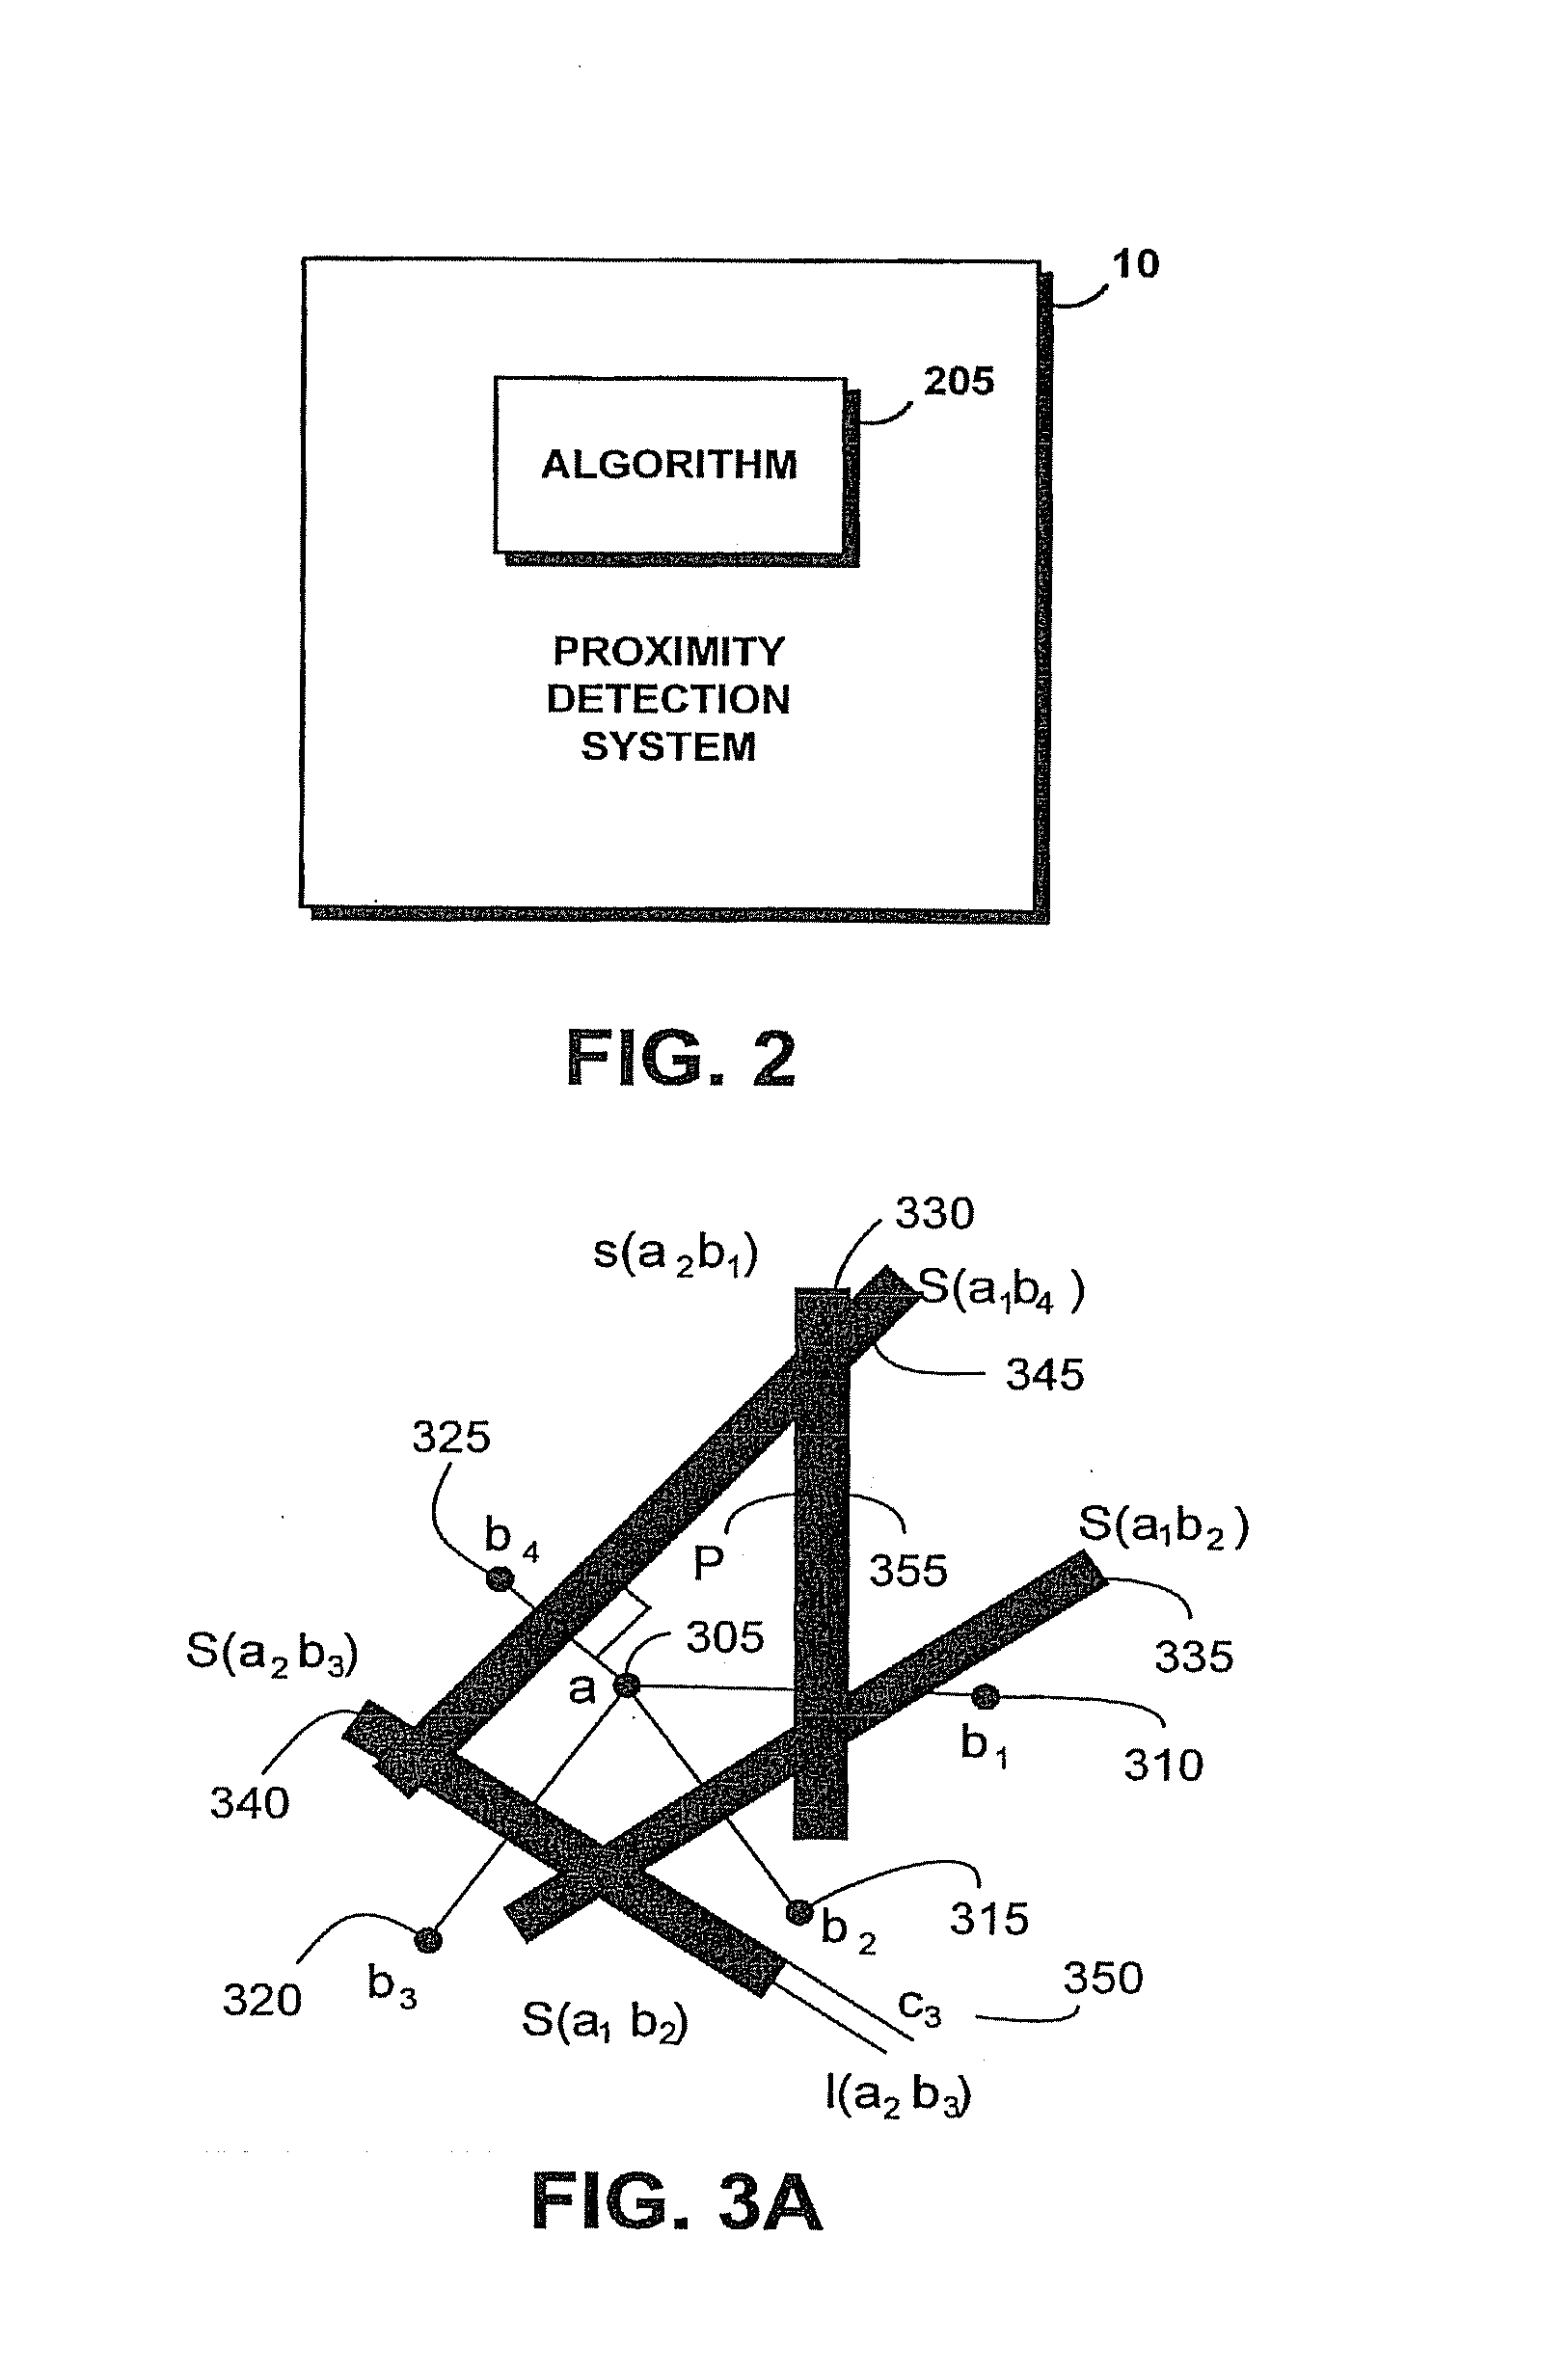 System and method for detecting proximity between mobile device users